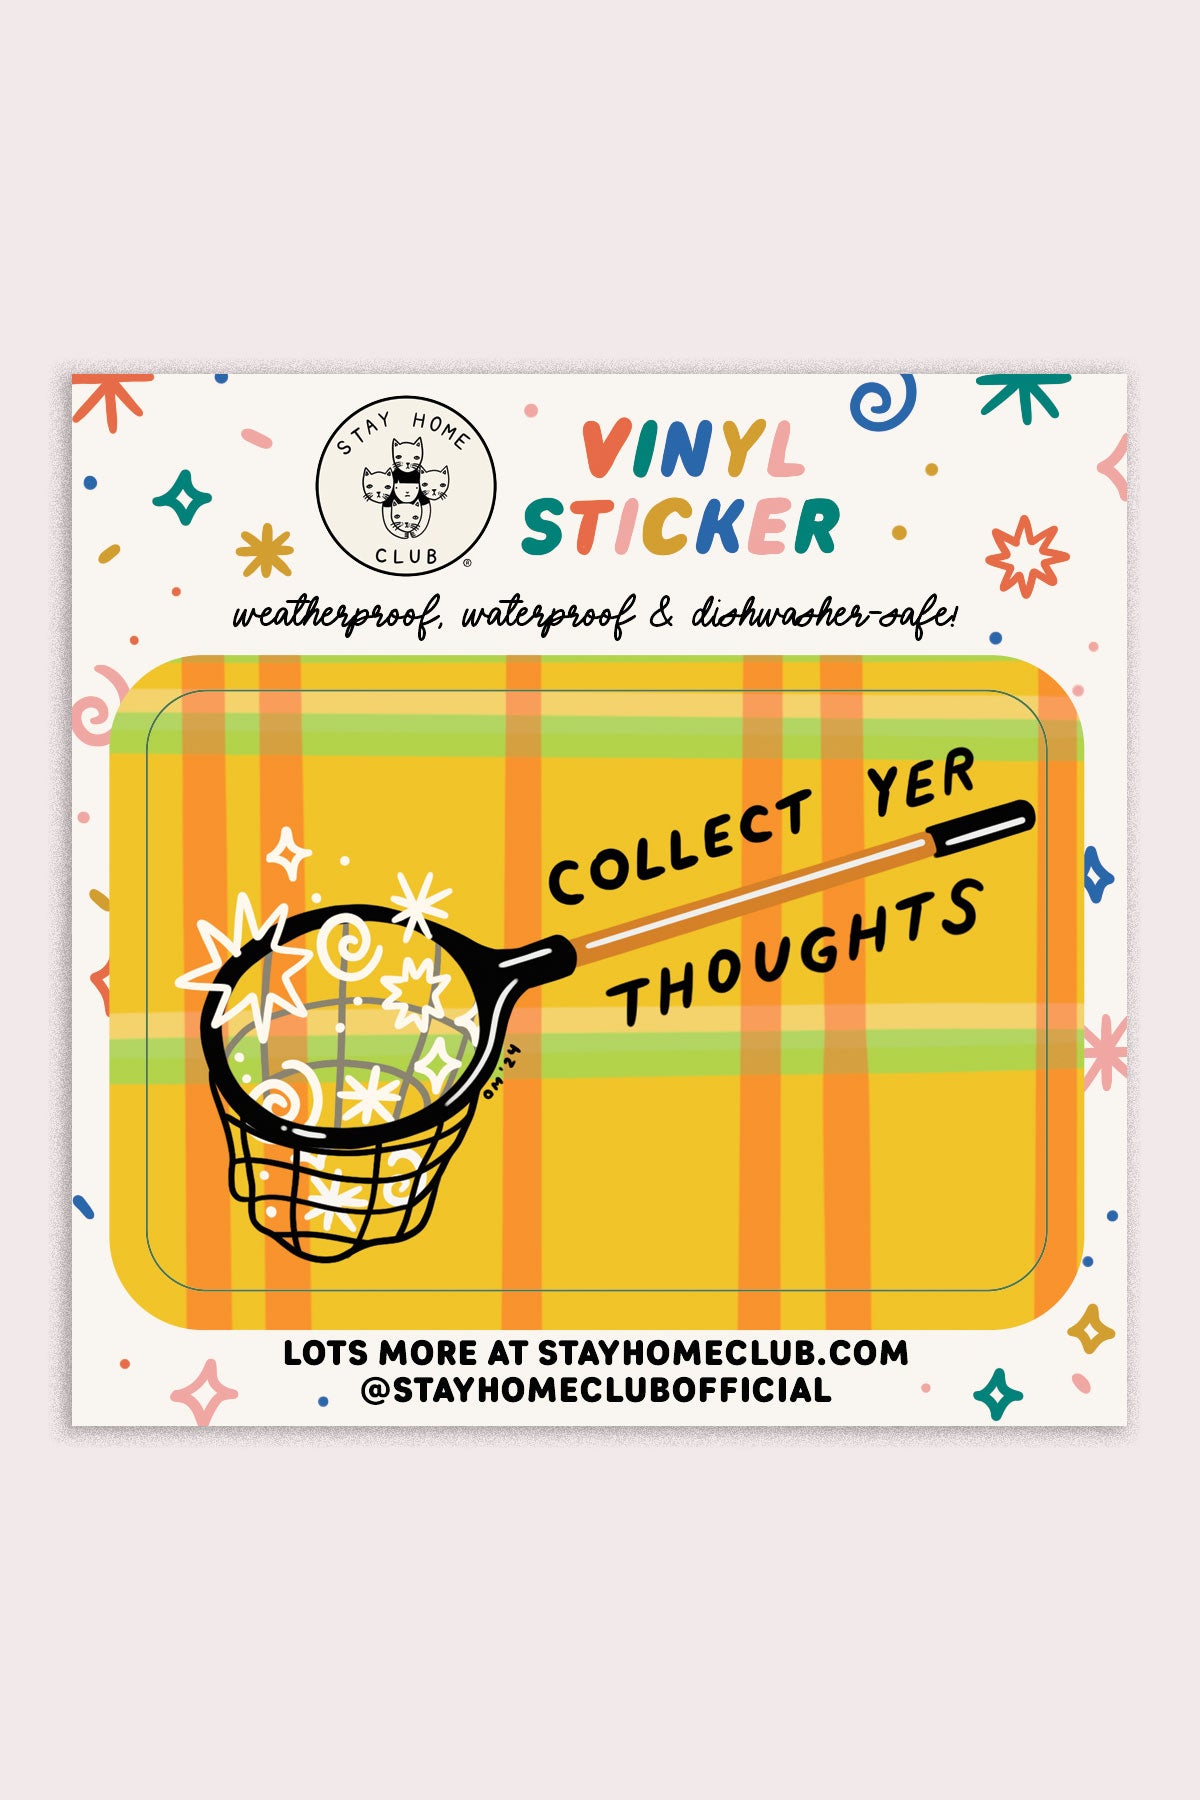 Collect Yer Thoughts Vinyl Sticker